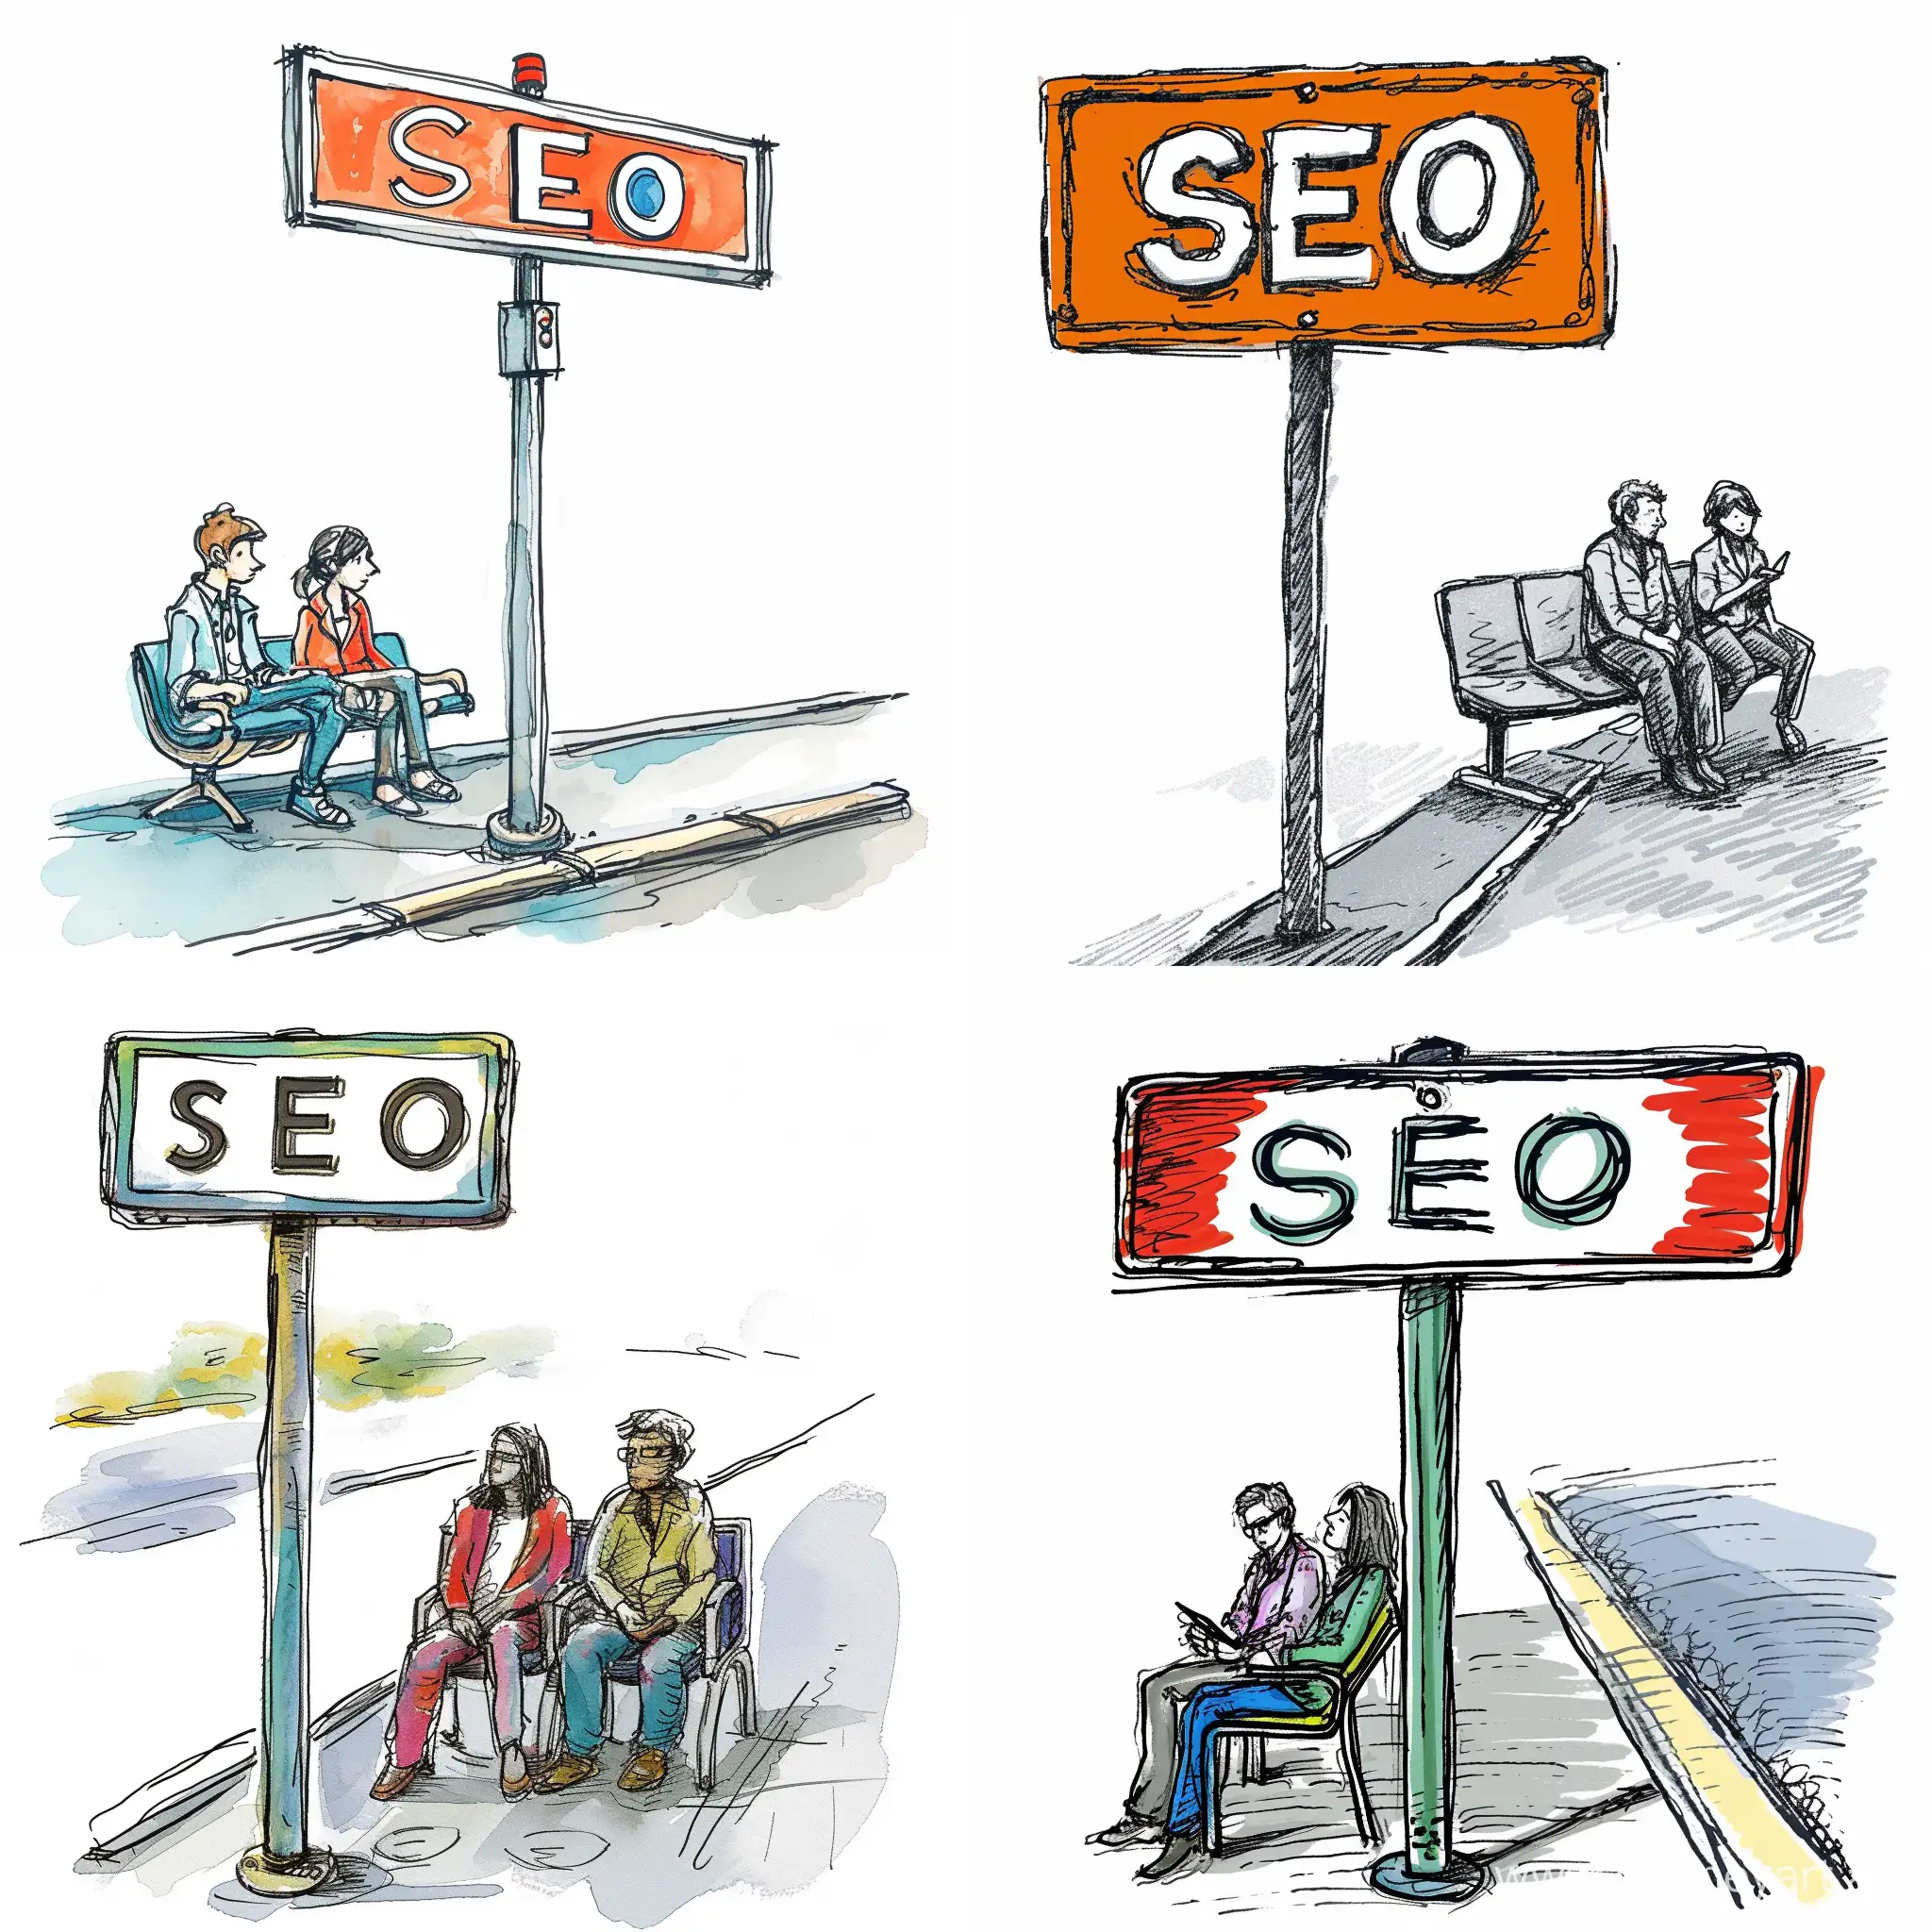 SEO-Street-Sign-Meeting-Two-People-Waiting